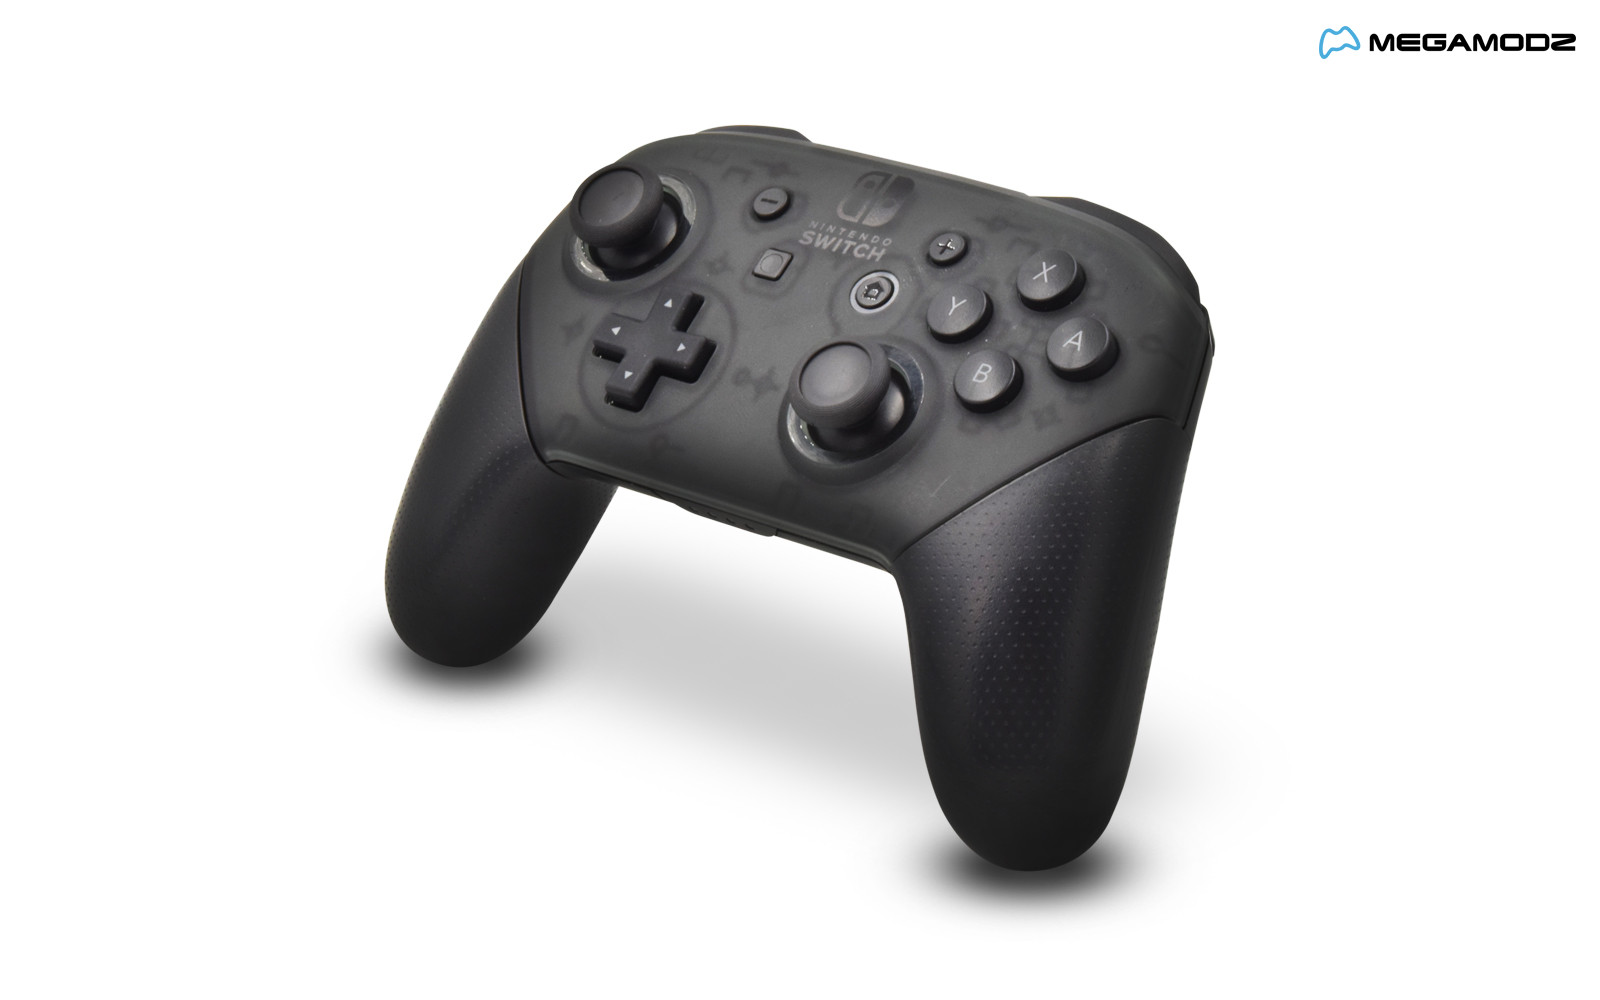 paddle controller nintendo switch